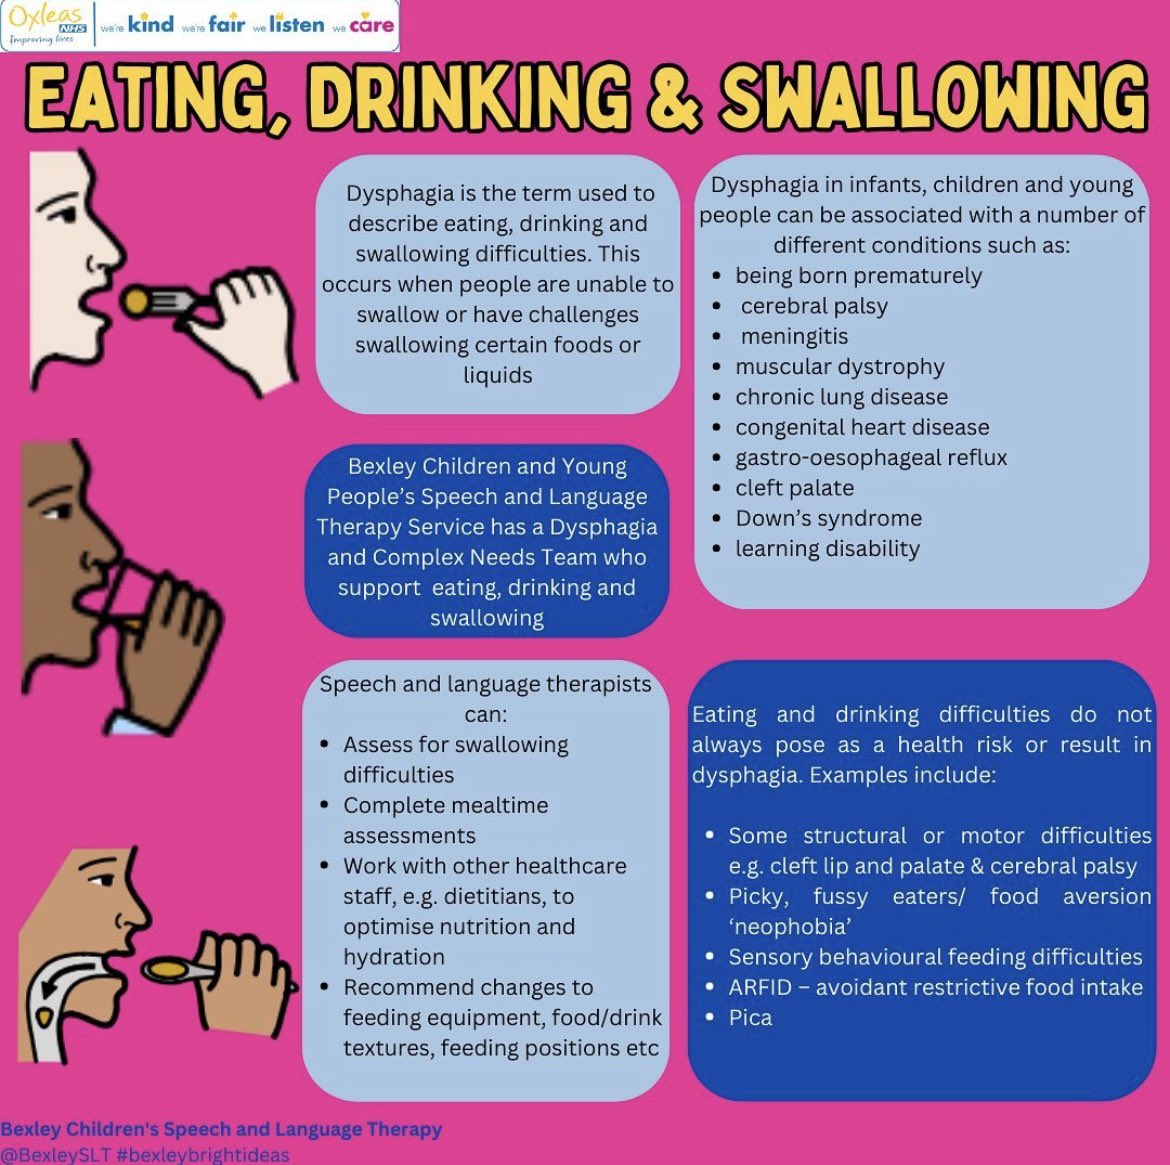 Happy Swallow Awareness Day! Did you know that speech and language therapists also have a key role in identifying, assessment and managing eating drinking and swallowing difficulties? #bexleybrightideas #BexleySLT #SwallowAware2024 #SwallowAware #SwallowingAwarenessDay #Dysphagia